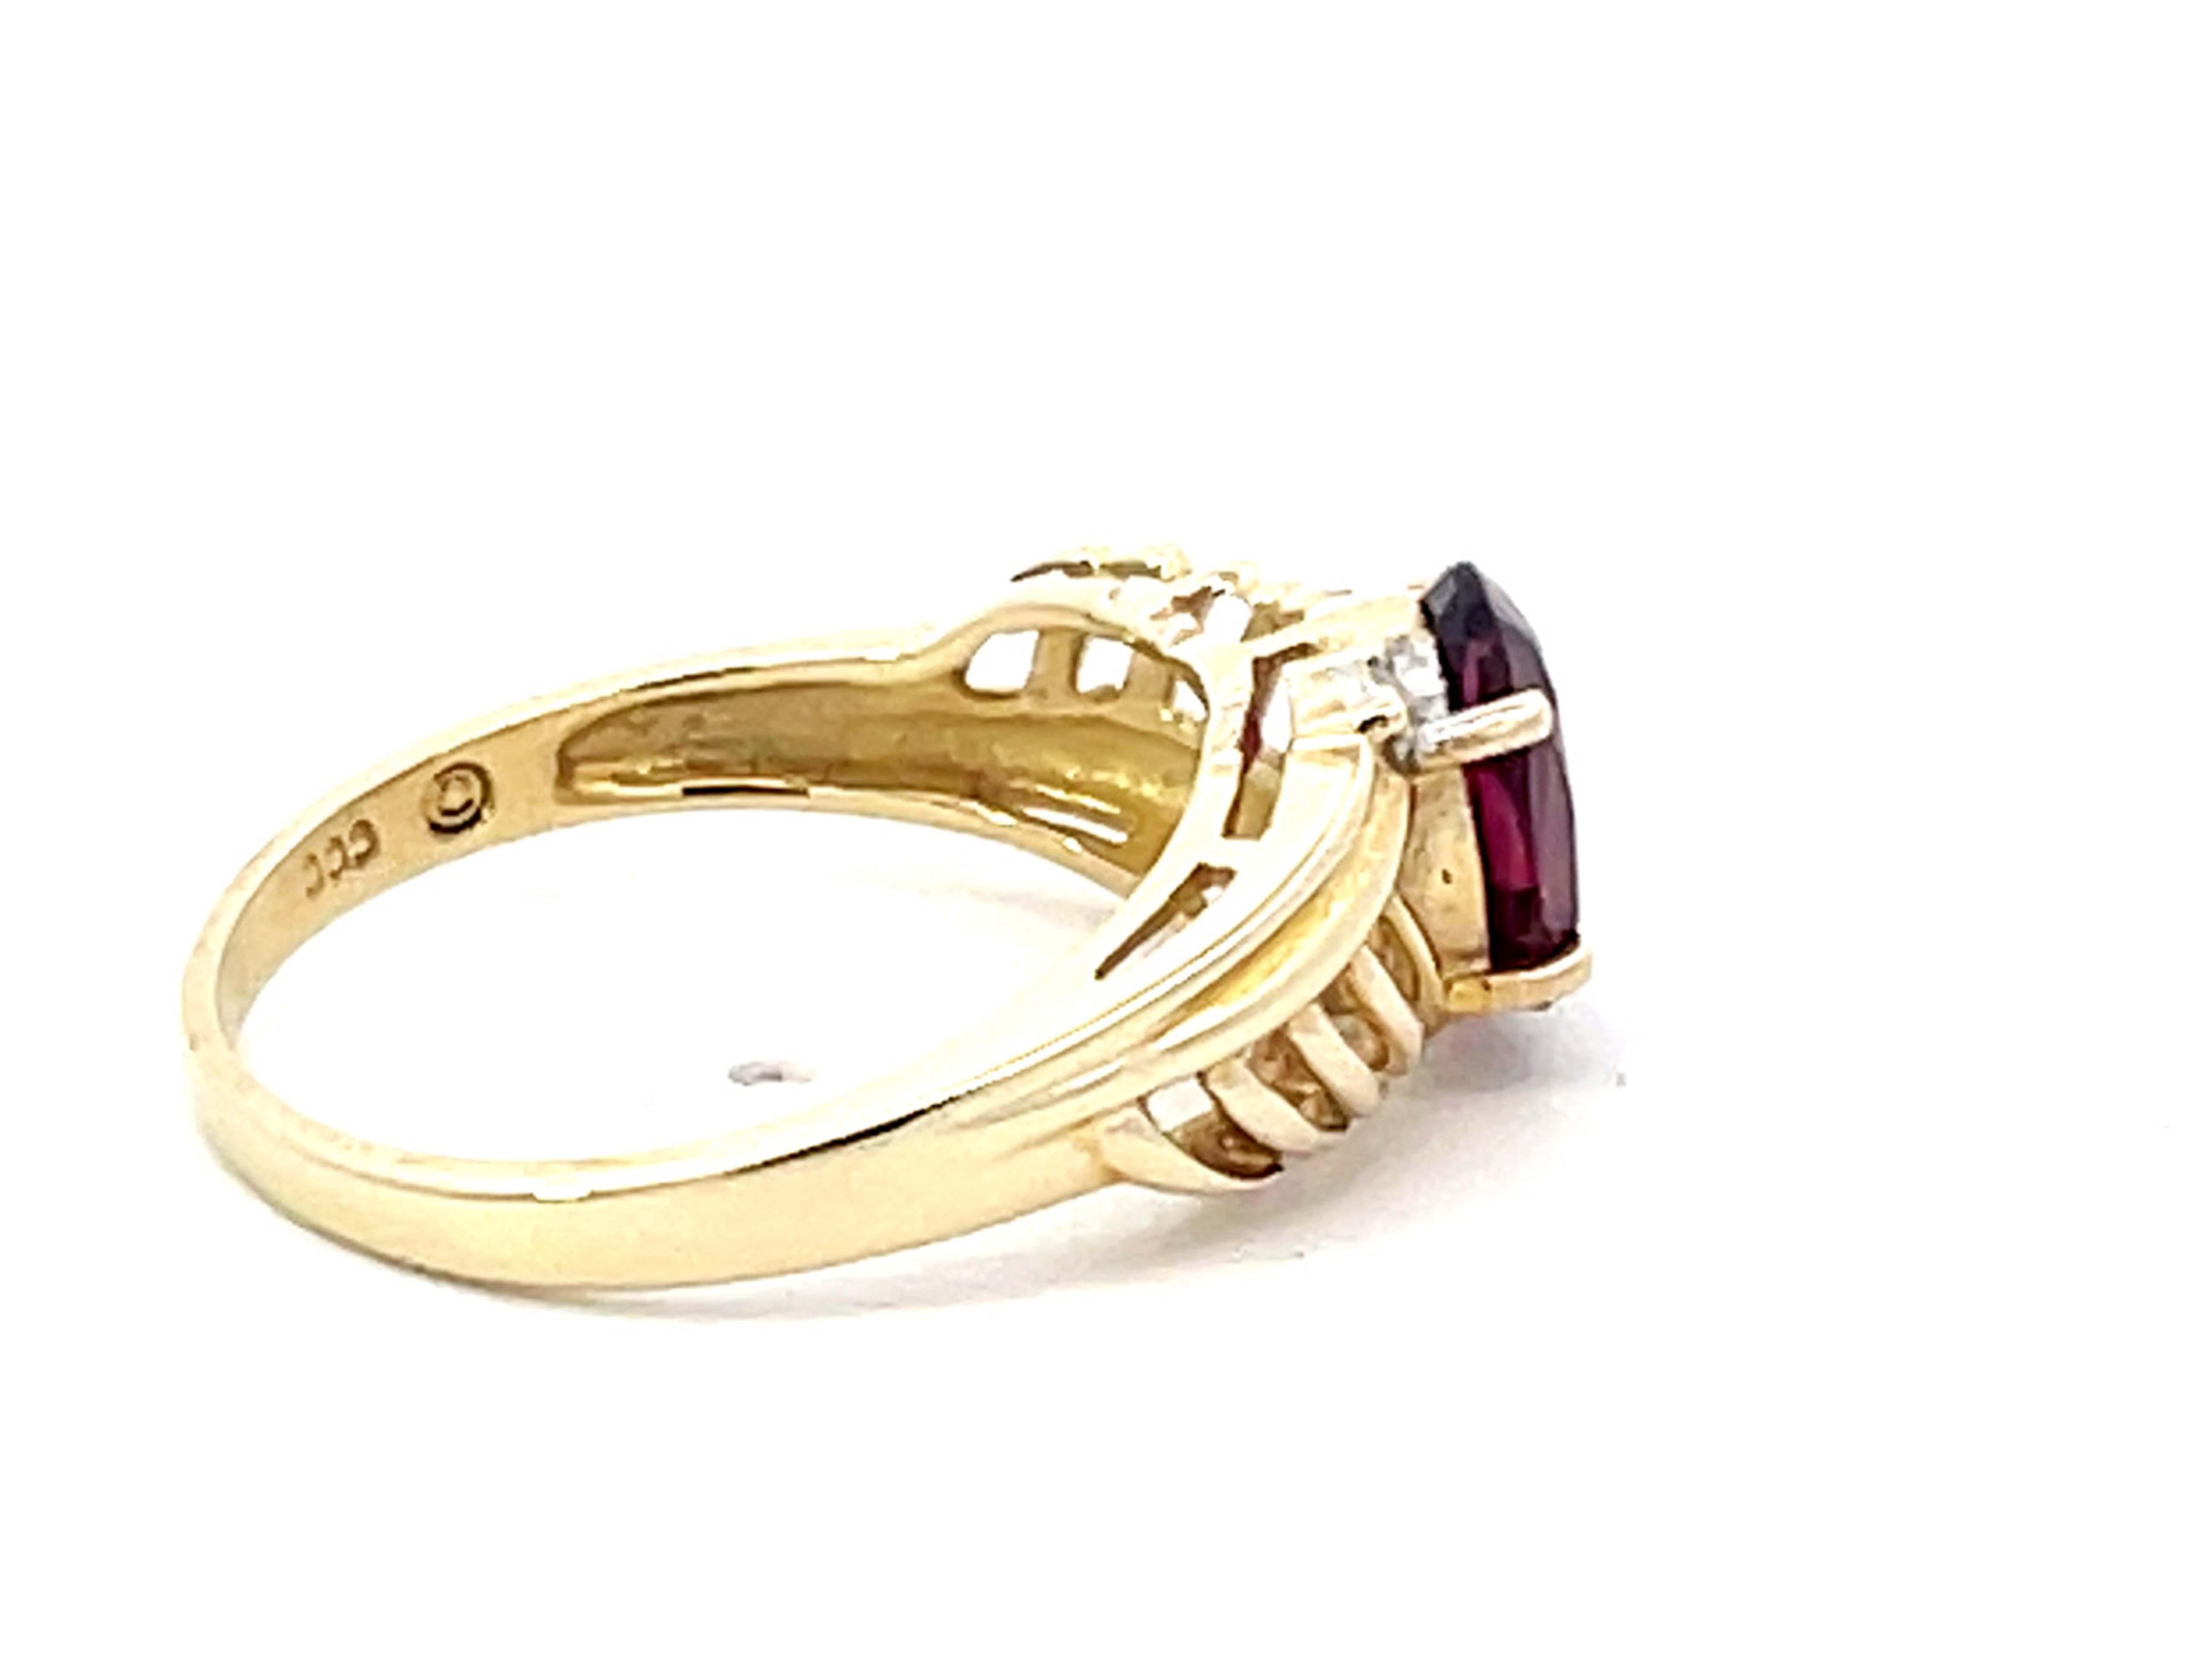 Oval Cut Red Rubellite Garnet and Diamond Ring in 14k Yellow Gold For Sale